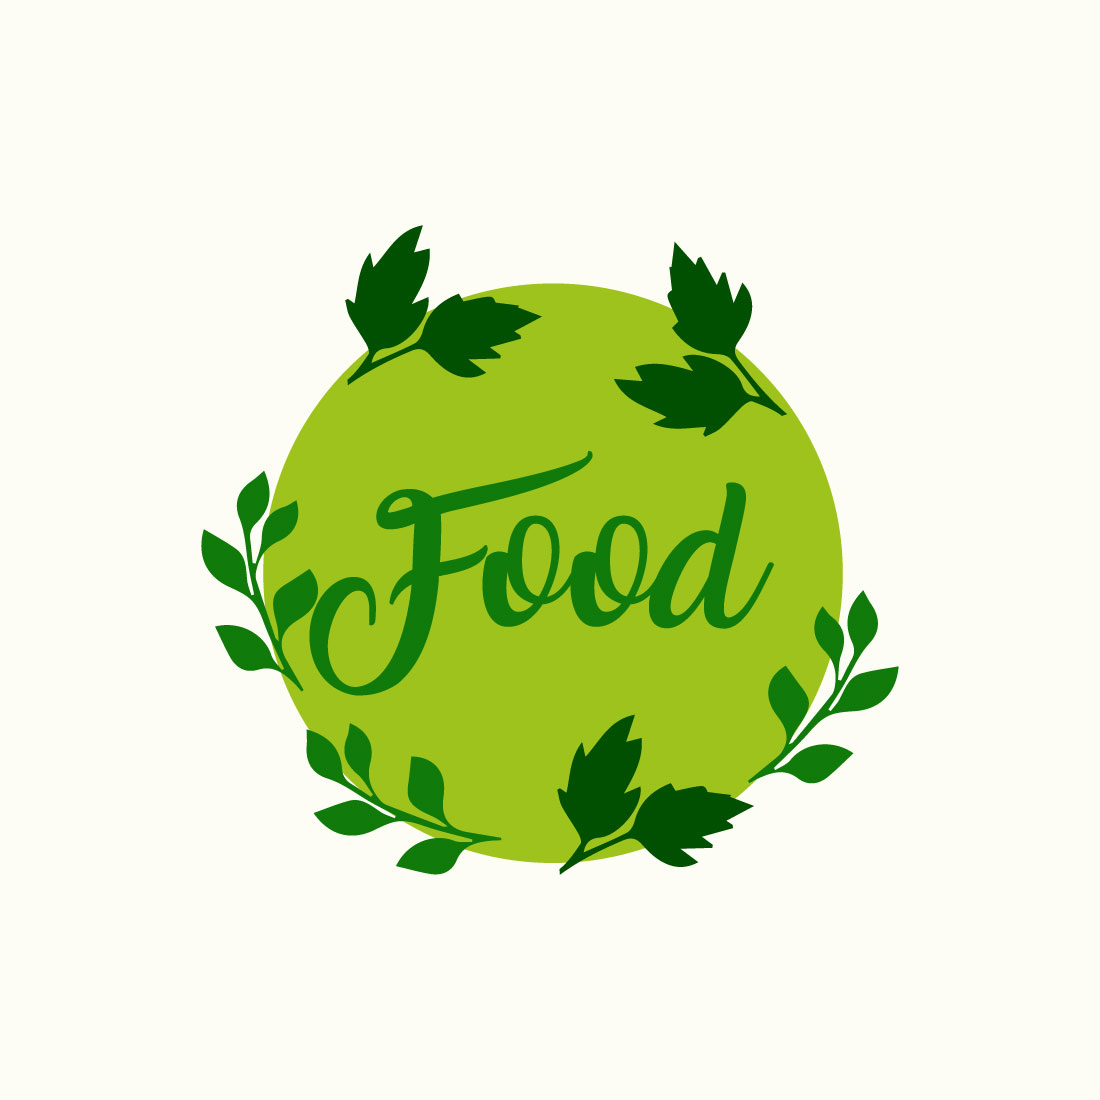 Free Farm-to-table logo cover image.